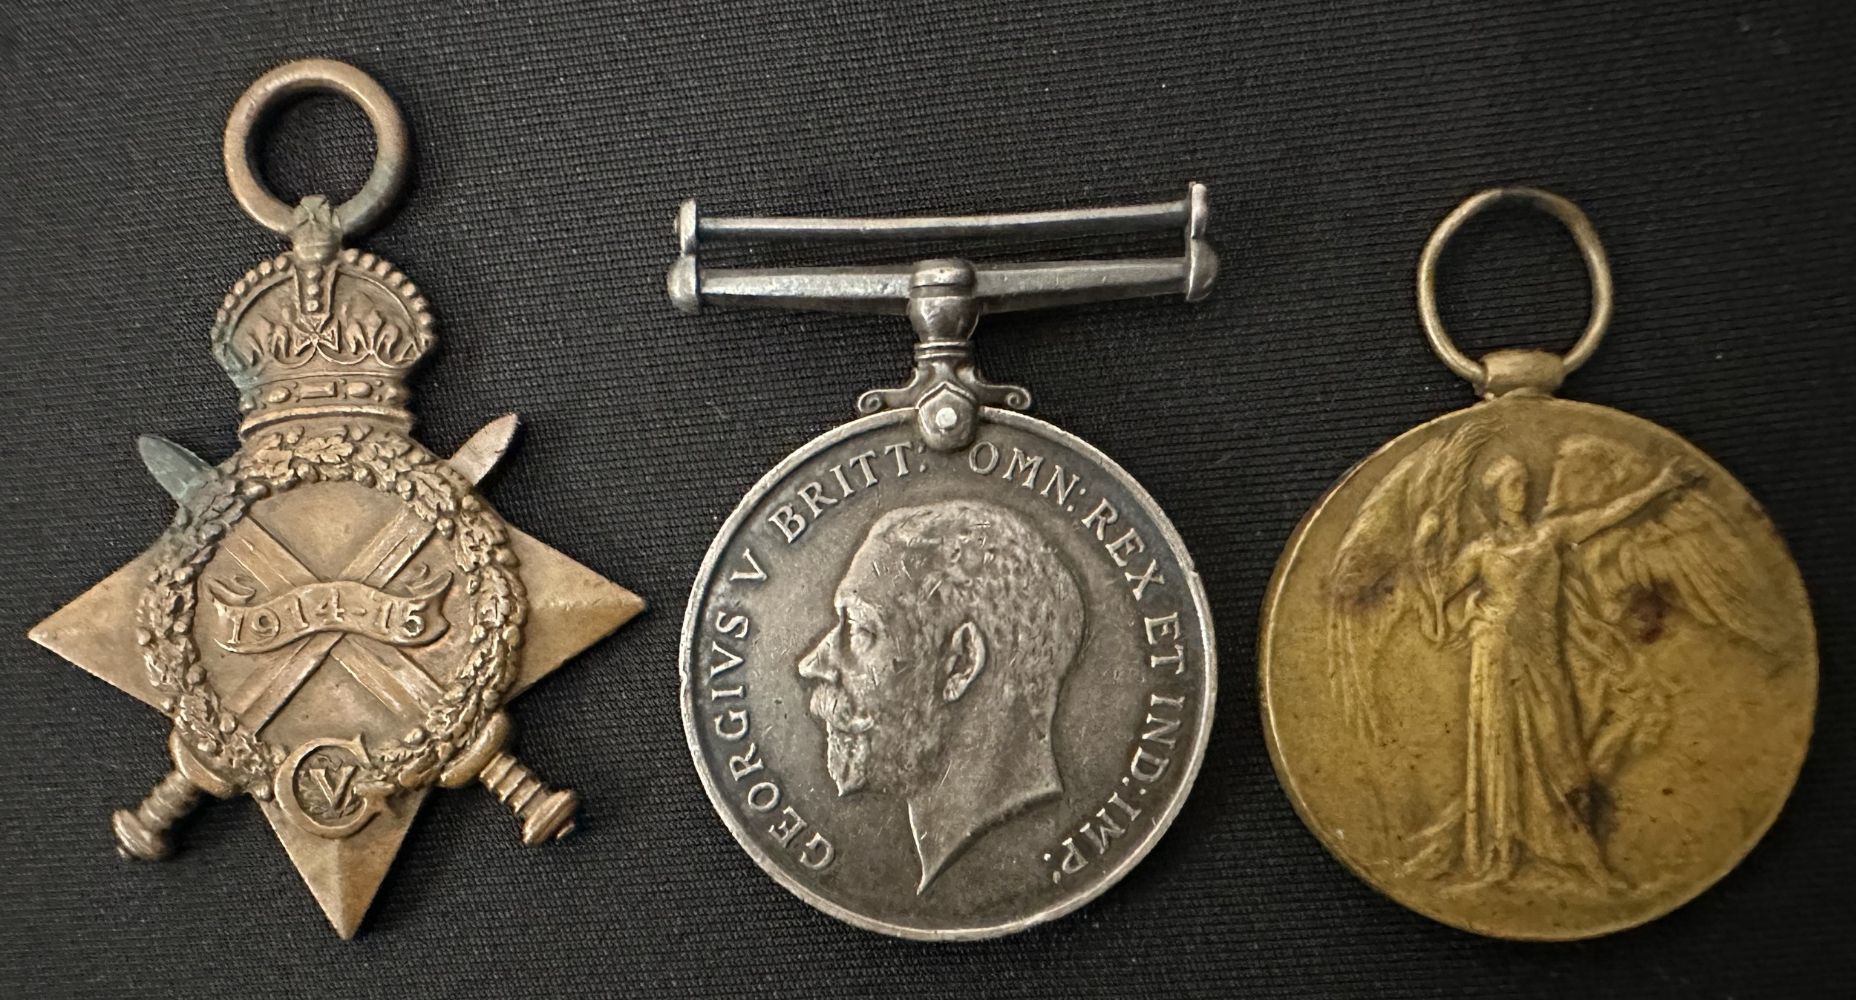 The Derby Saleroom Medals, Militaria and Firearms Auction